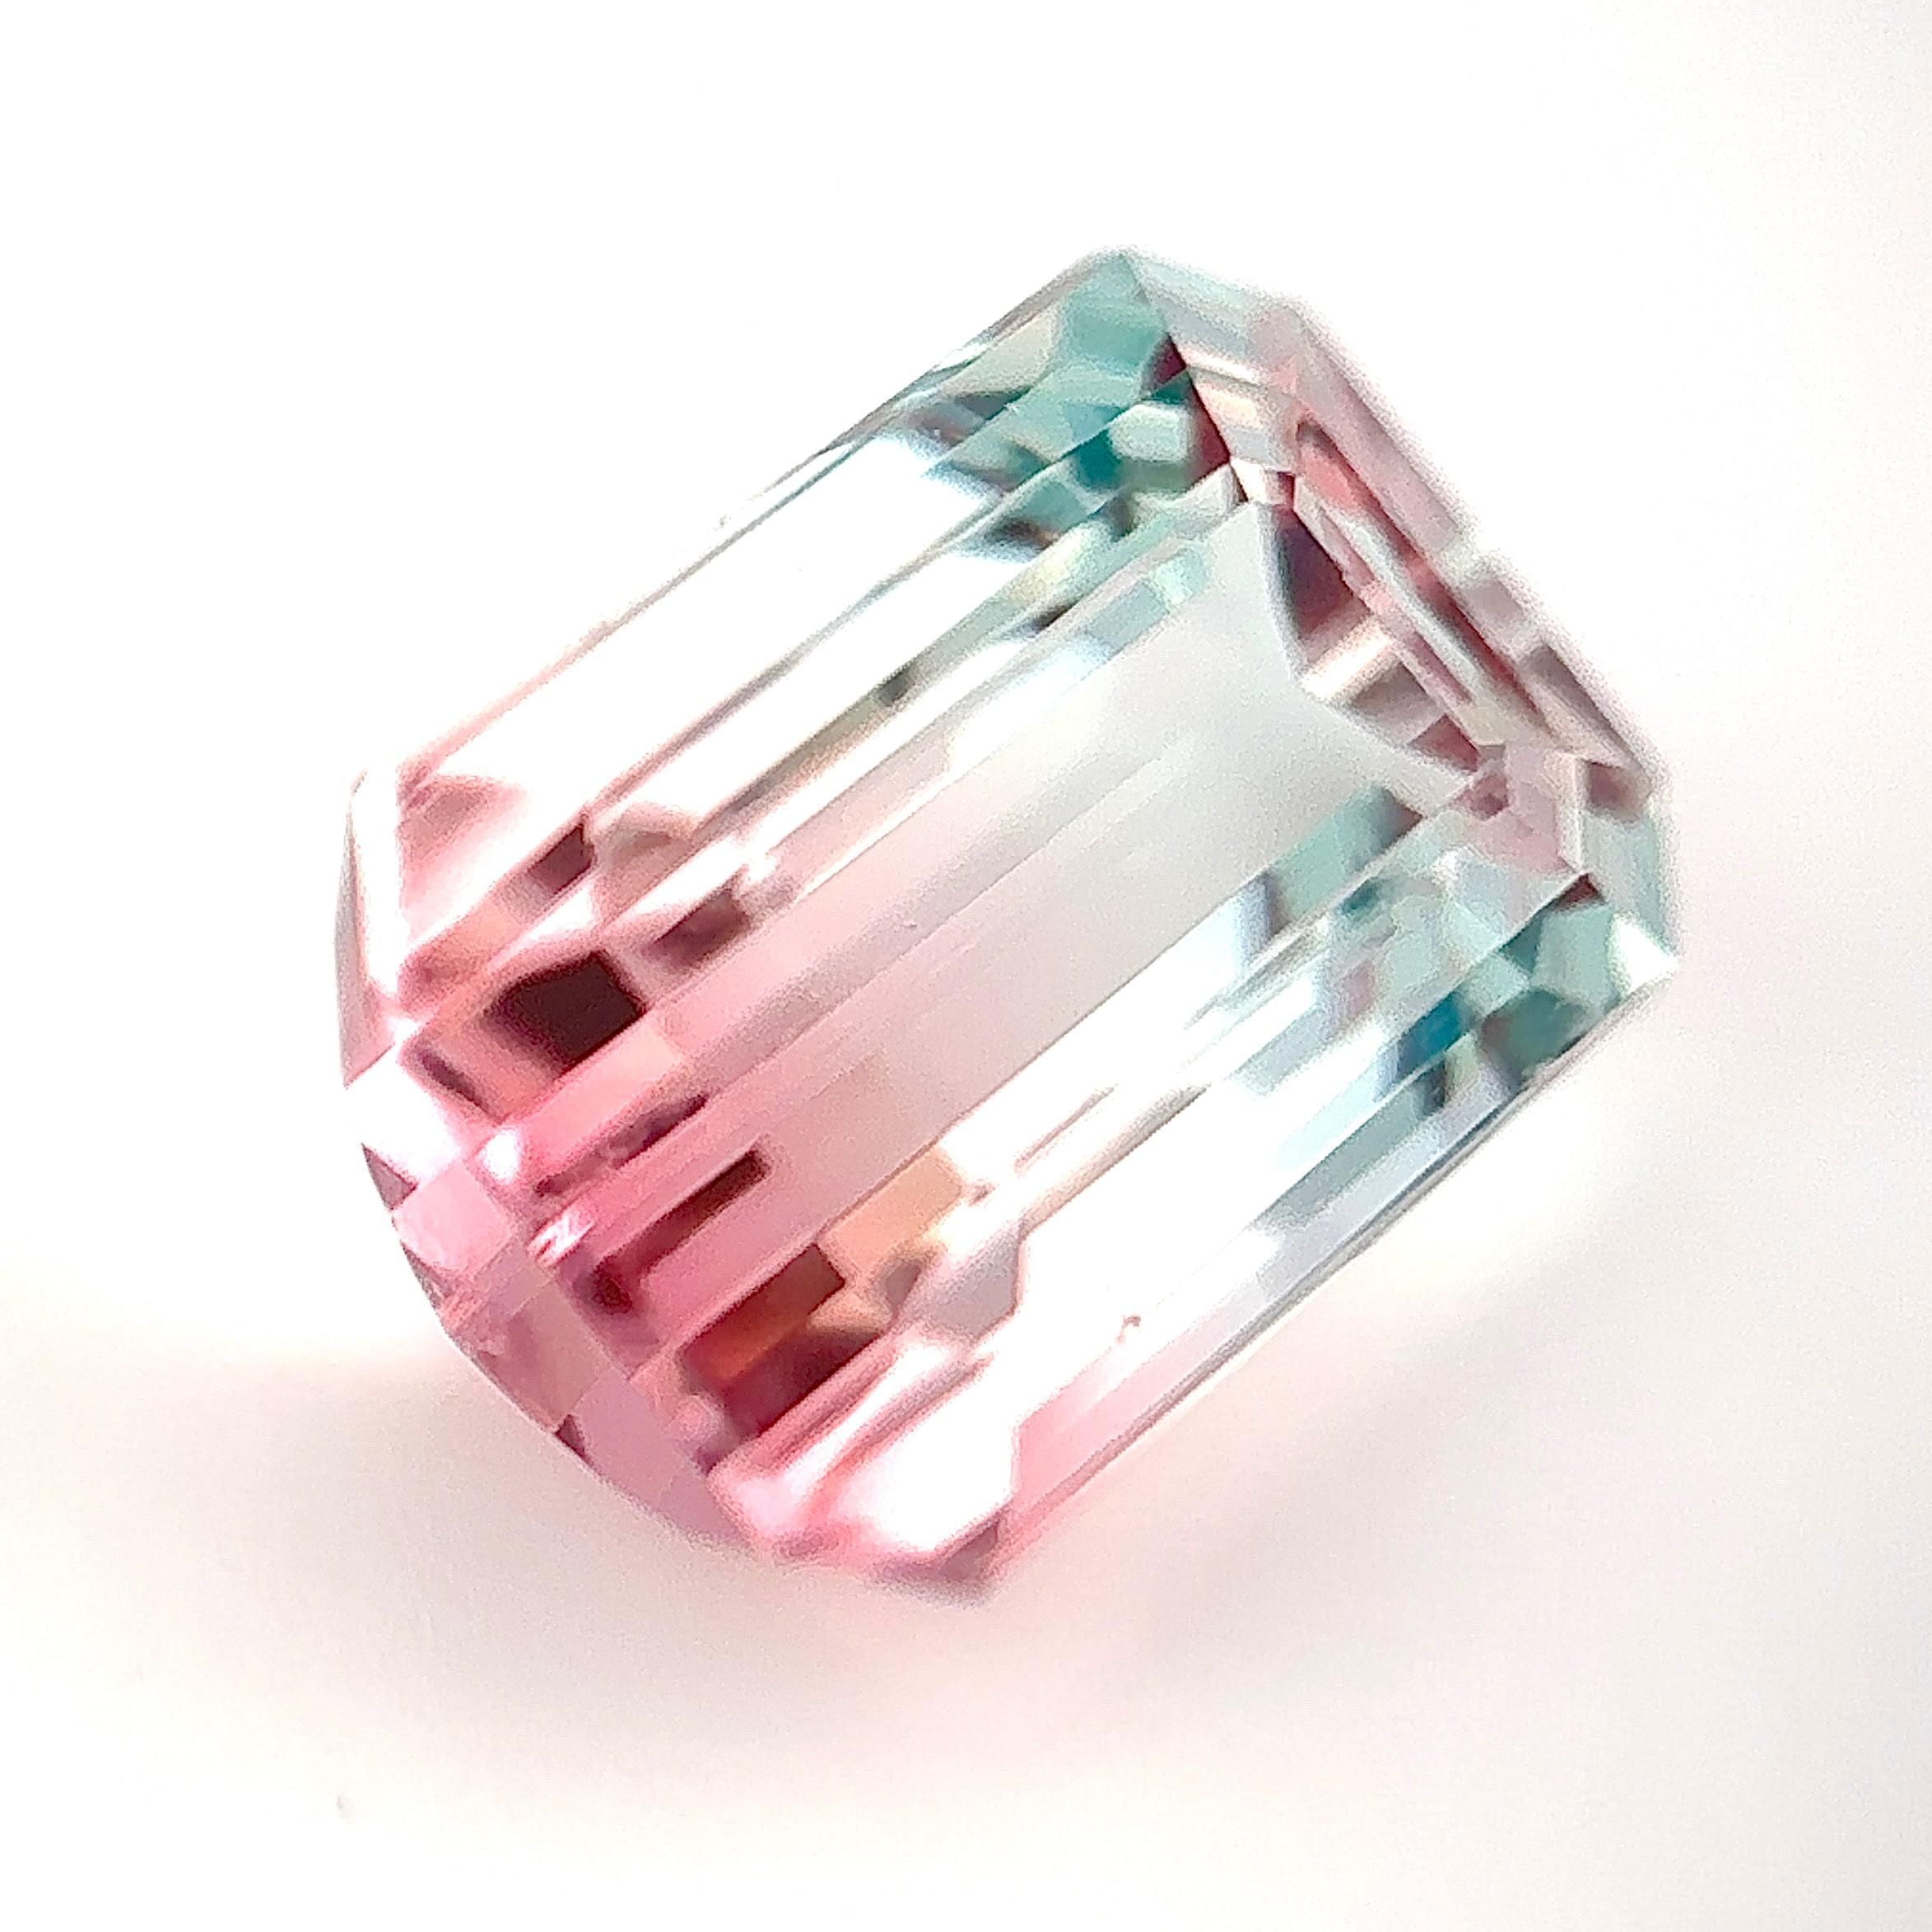 4.53 Carat Natural Bi Color Watermelon Tourmaline Loose stone in Pink and Green

Website video uploading might be slow; message us for more details. 

GRS/GCS/GIA appointed lab certificate can be arranged upon request

To design your own jewellery,